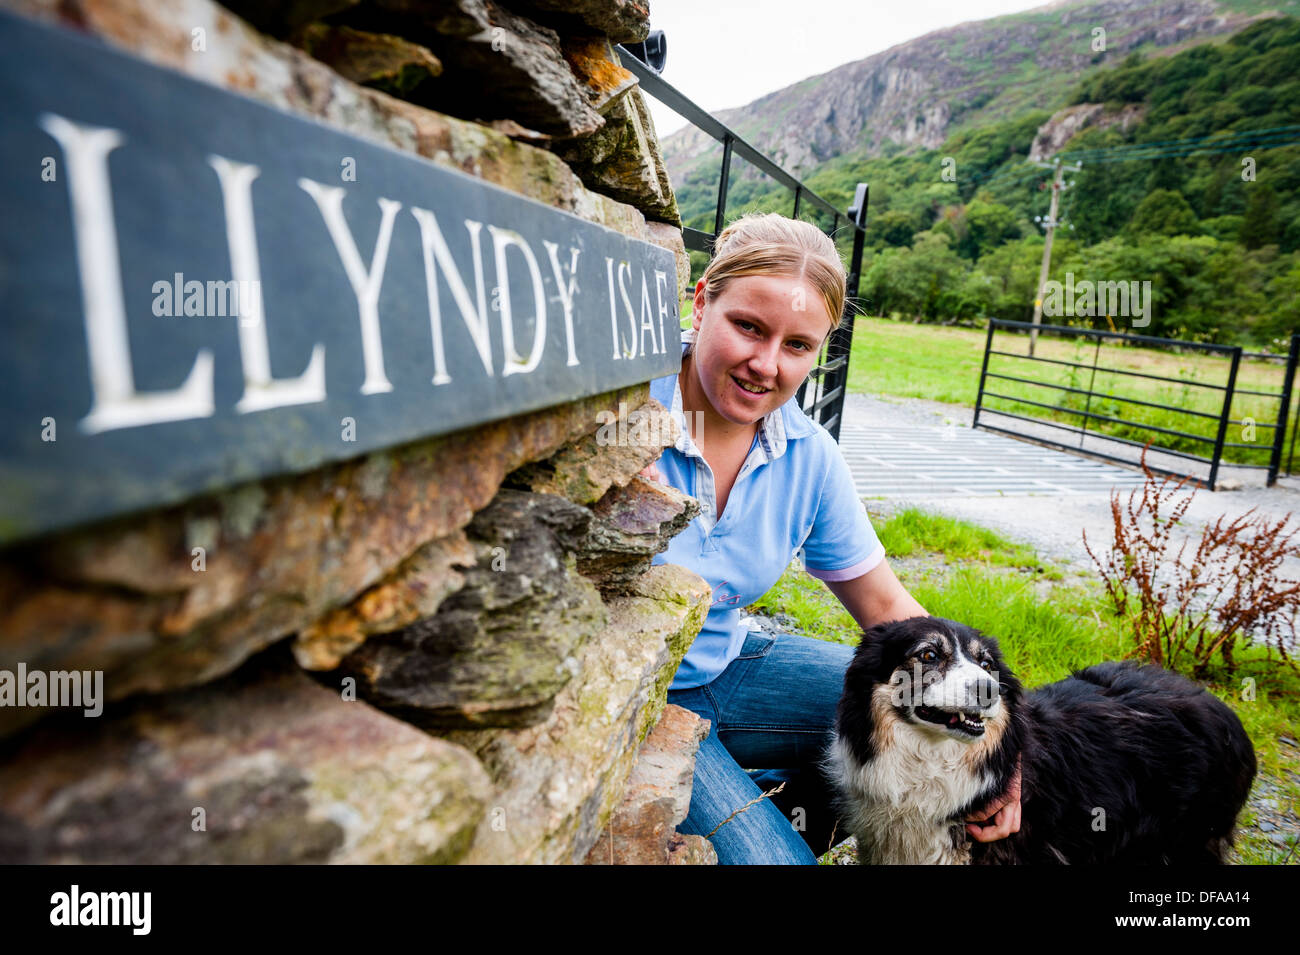 Caryl Hughes, with her sheepdog Mist, who will be farming the National Trust land at Llyndy Isaf farm, near Beddgelert Wales UK Stock Photo